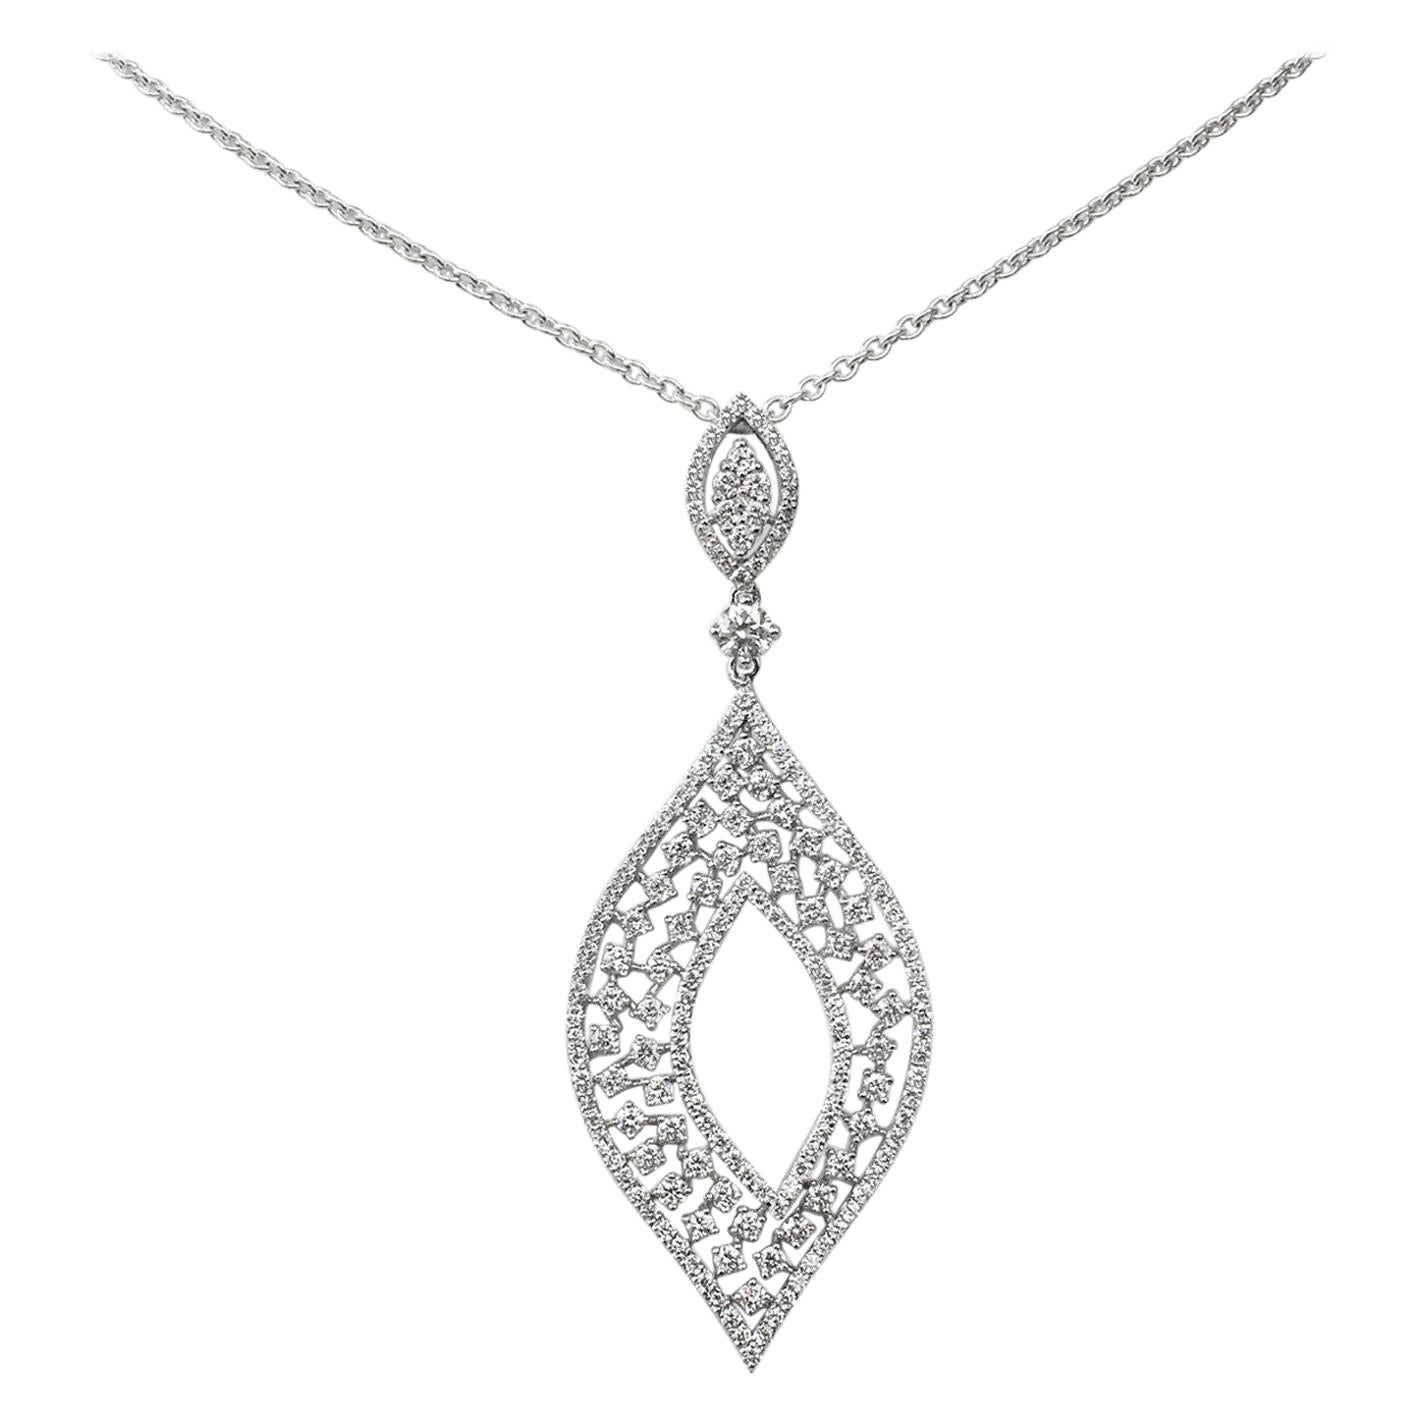 18Karat Gold Pendant Necklace White Gold Diamond Pave Dangle Fashion Pendant Necklace
           A classic pendant necklace is fully paved with brilliant-cut diamonds set in stunning 18K white gold. Crafted with the joyful and brilliant spirit of